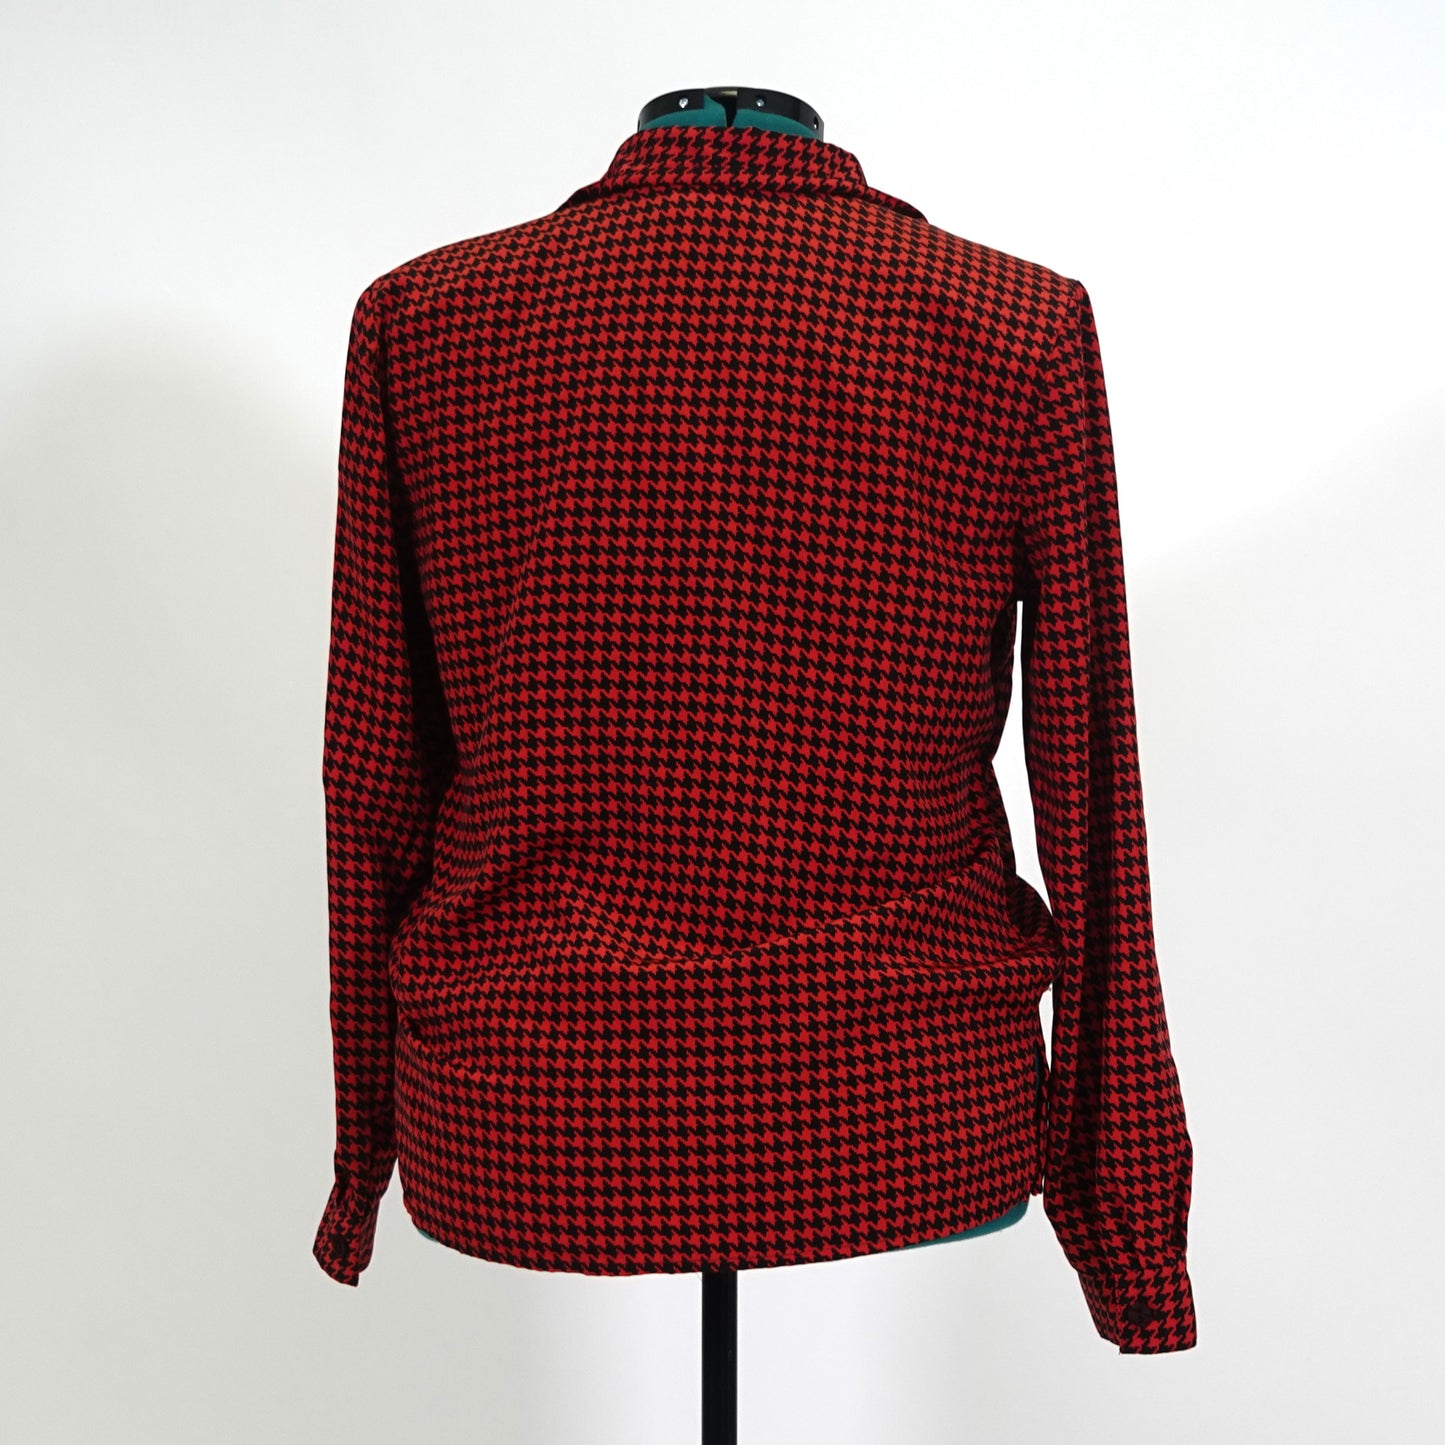 Vintage Red and Black Houndstooth Button Up Shirt